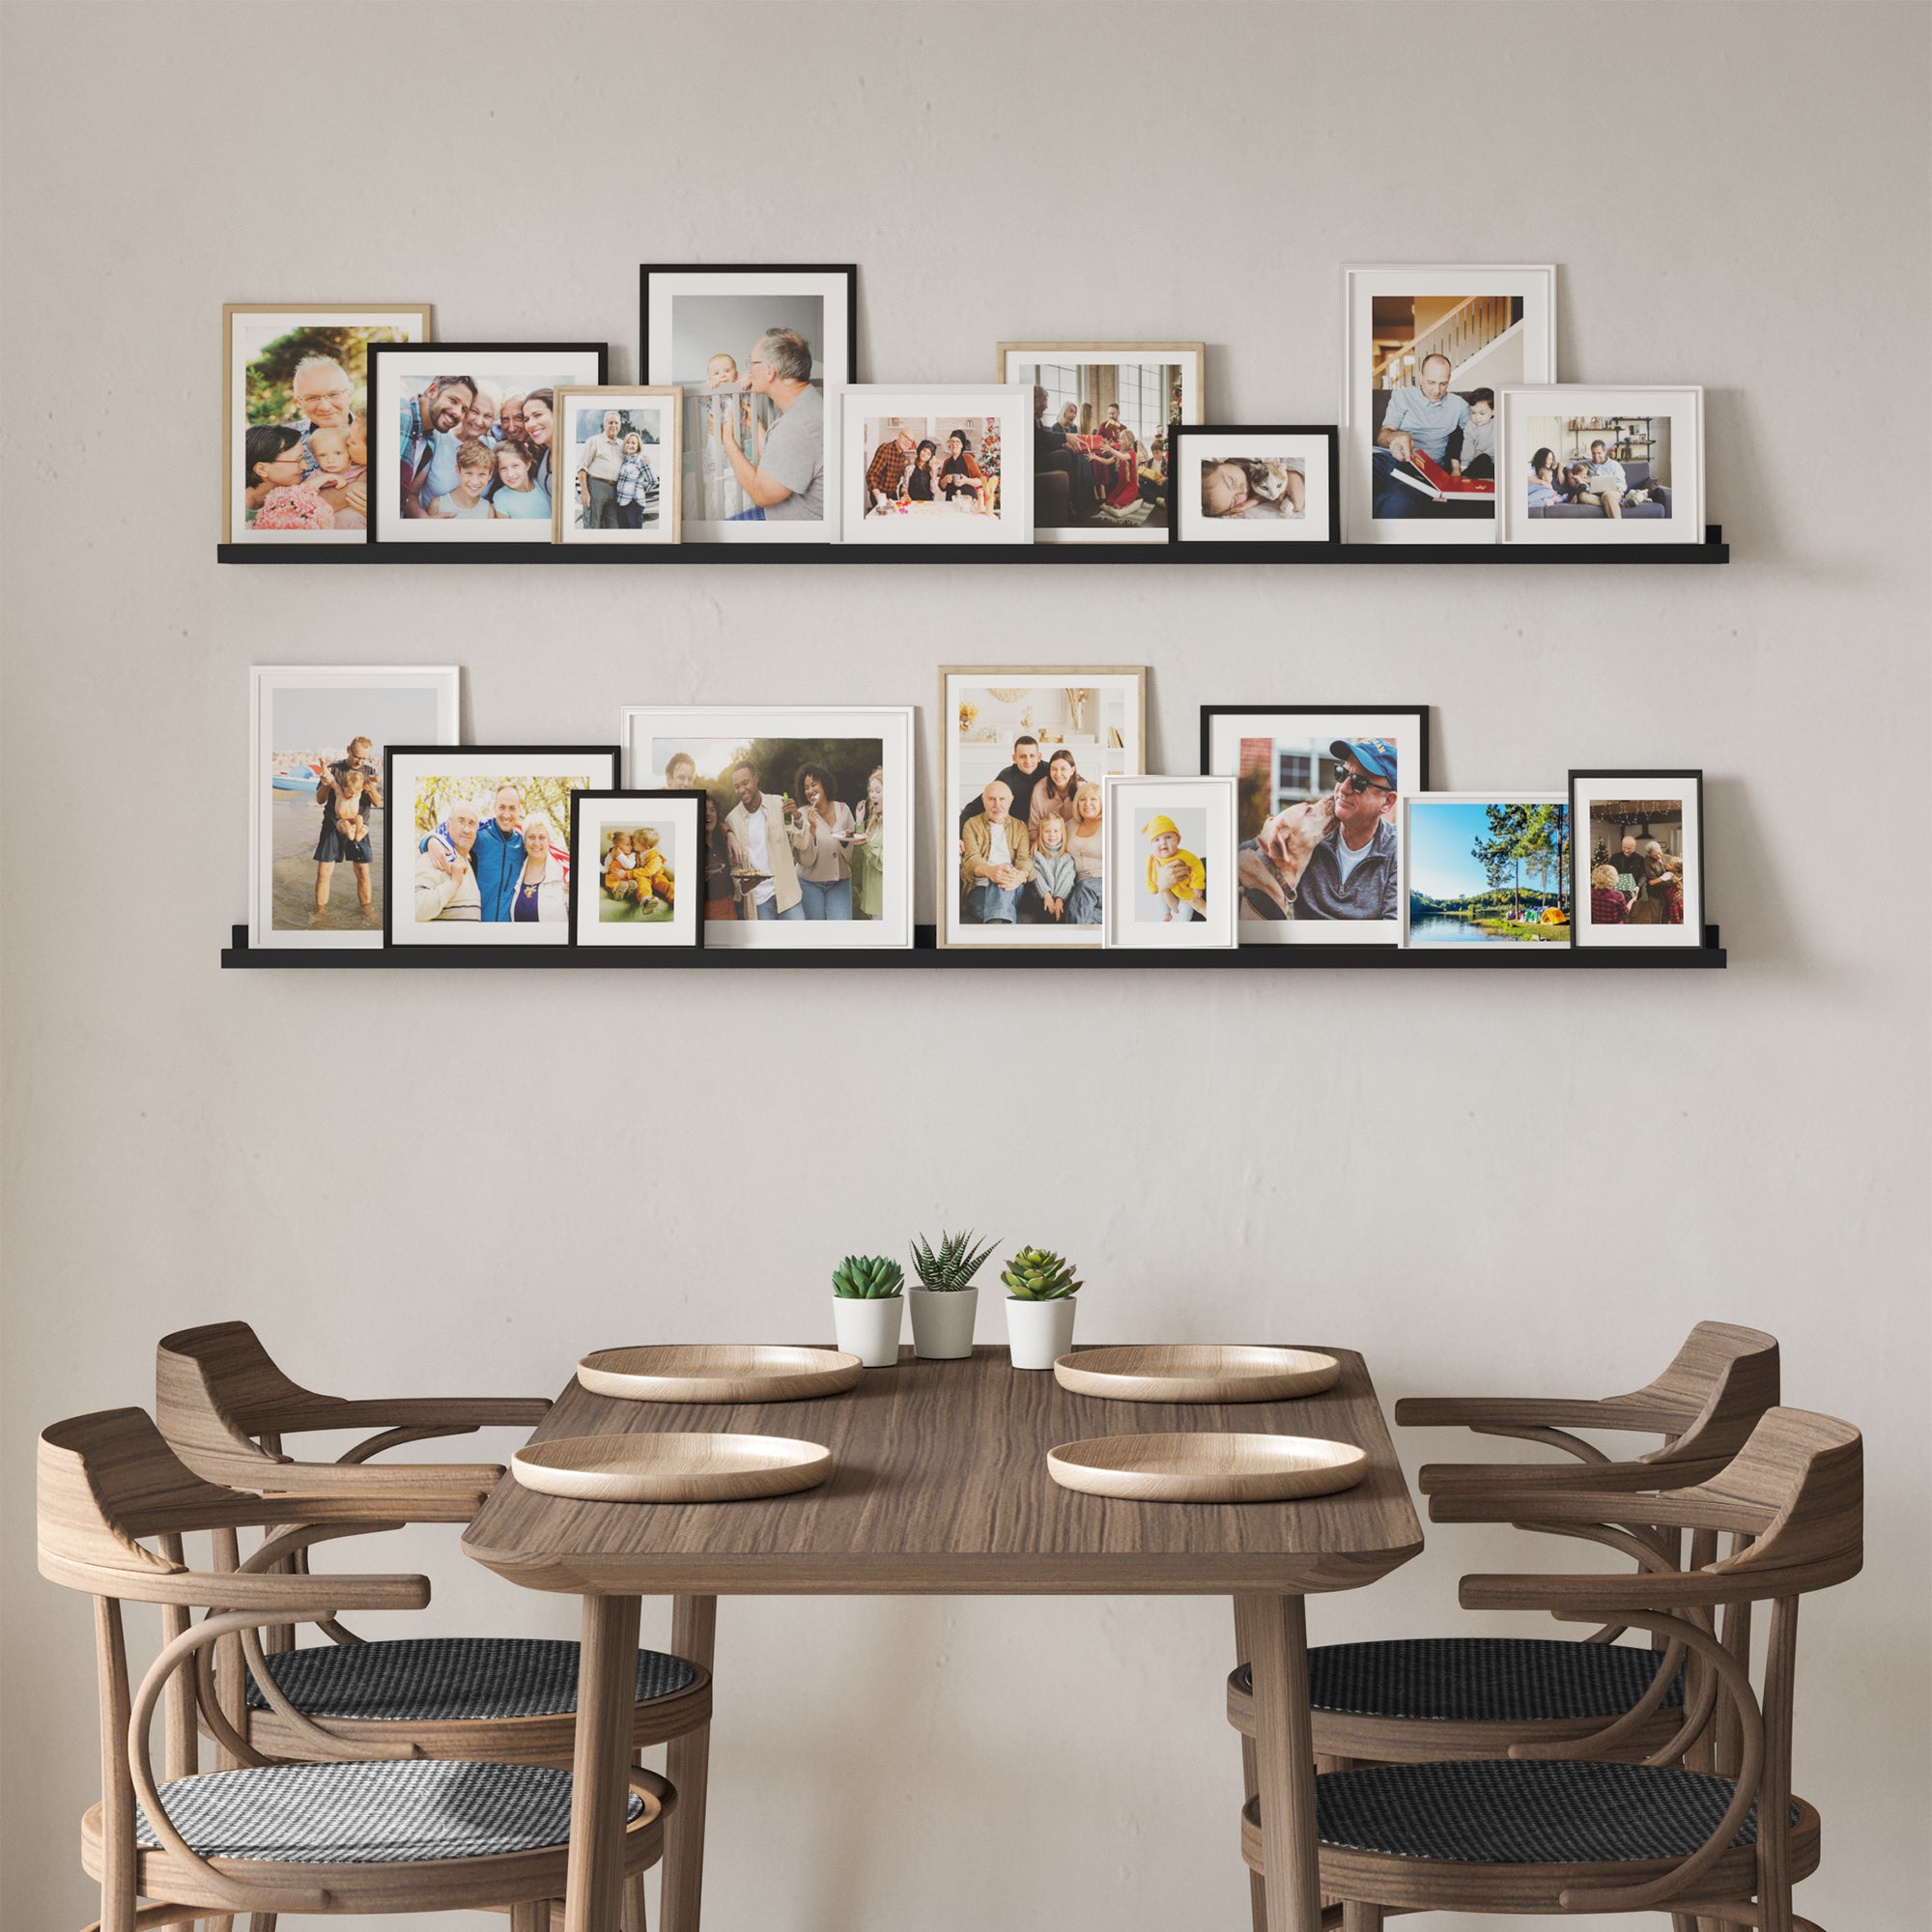 Dining area with family photos on picture shelves black, wooden chairs, and a table.